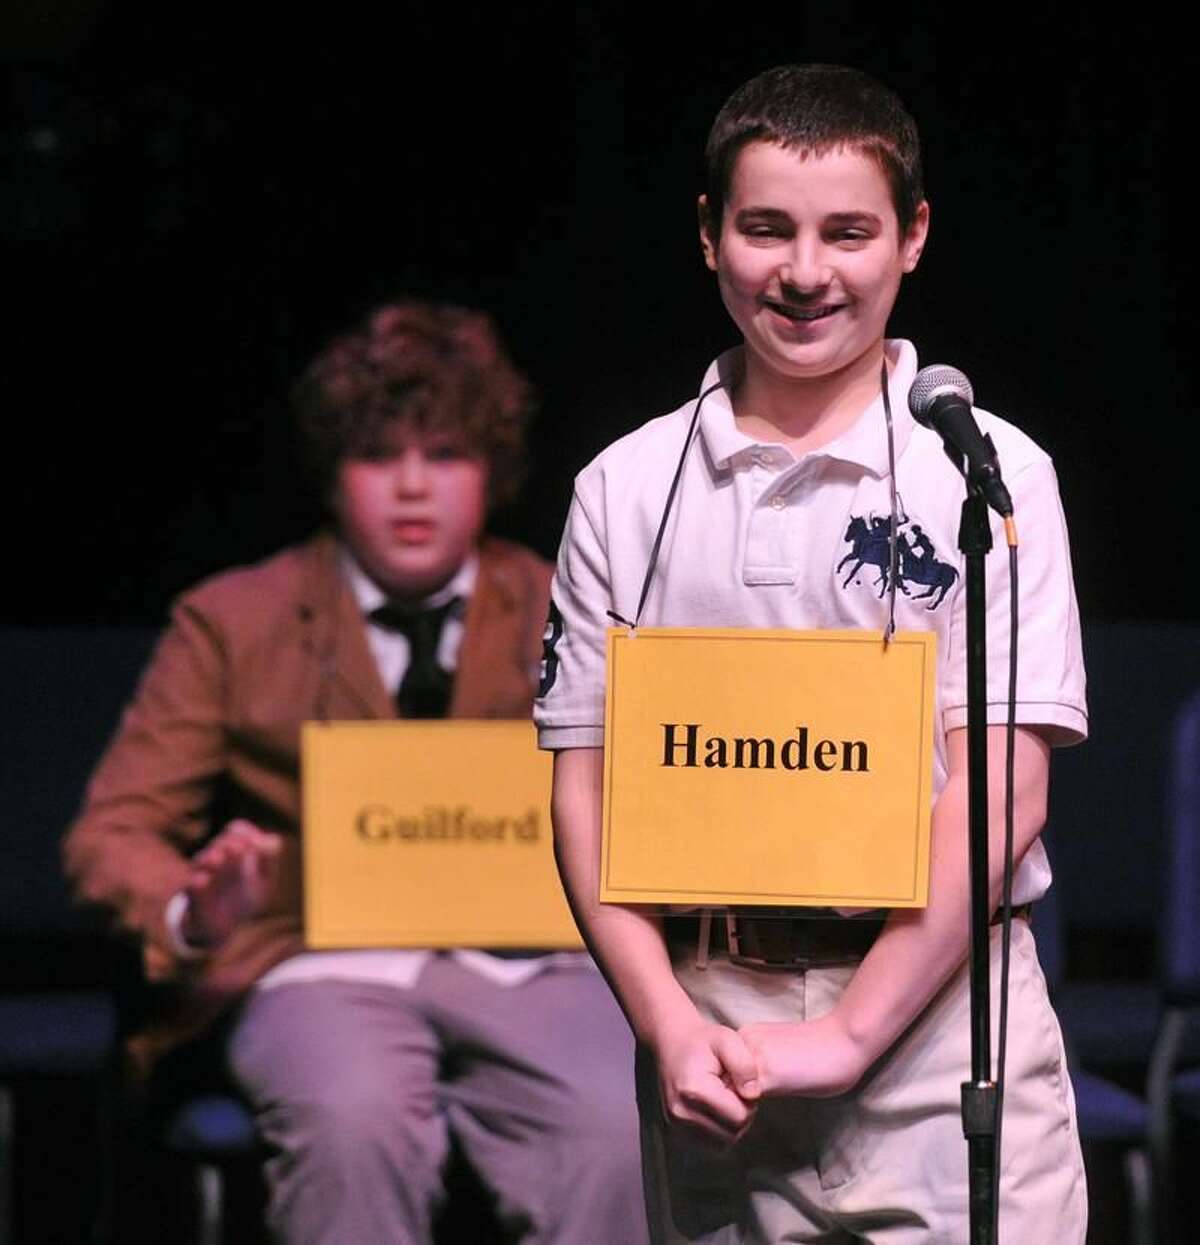 New Haven— Anthony Capasso, 13, from Hamden Hall, smiles as he wins the New Haven Register Spelling Bee at SCSU's Lyman Hall. Behind him is Max Martin, 14, of E.C. Adams Middle School in Guilford, who came in 2nd place. Photo-Peter Casolino/Register